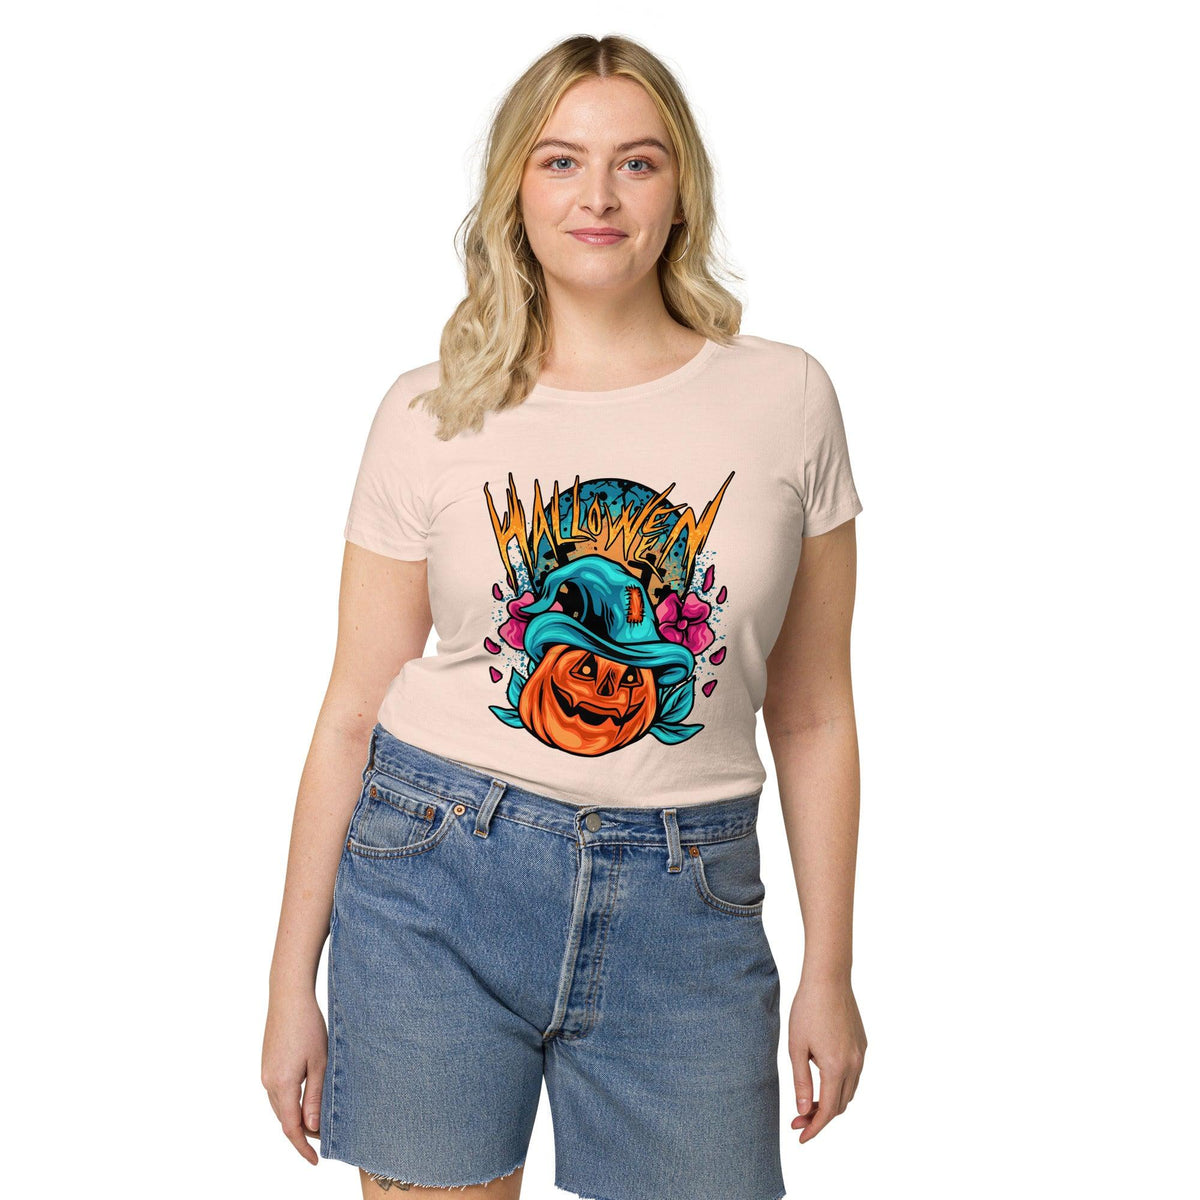 Woman rocking a ghoulishly glam skeleton dance organic tee, perfect for Halloween festivities.